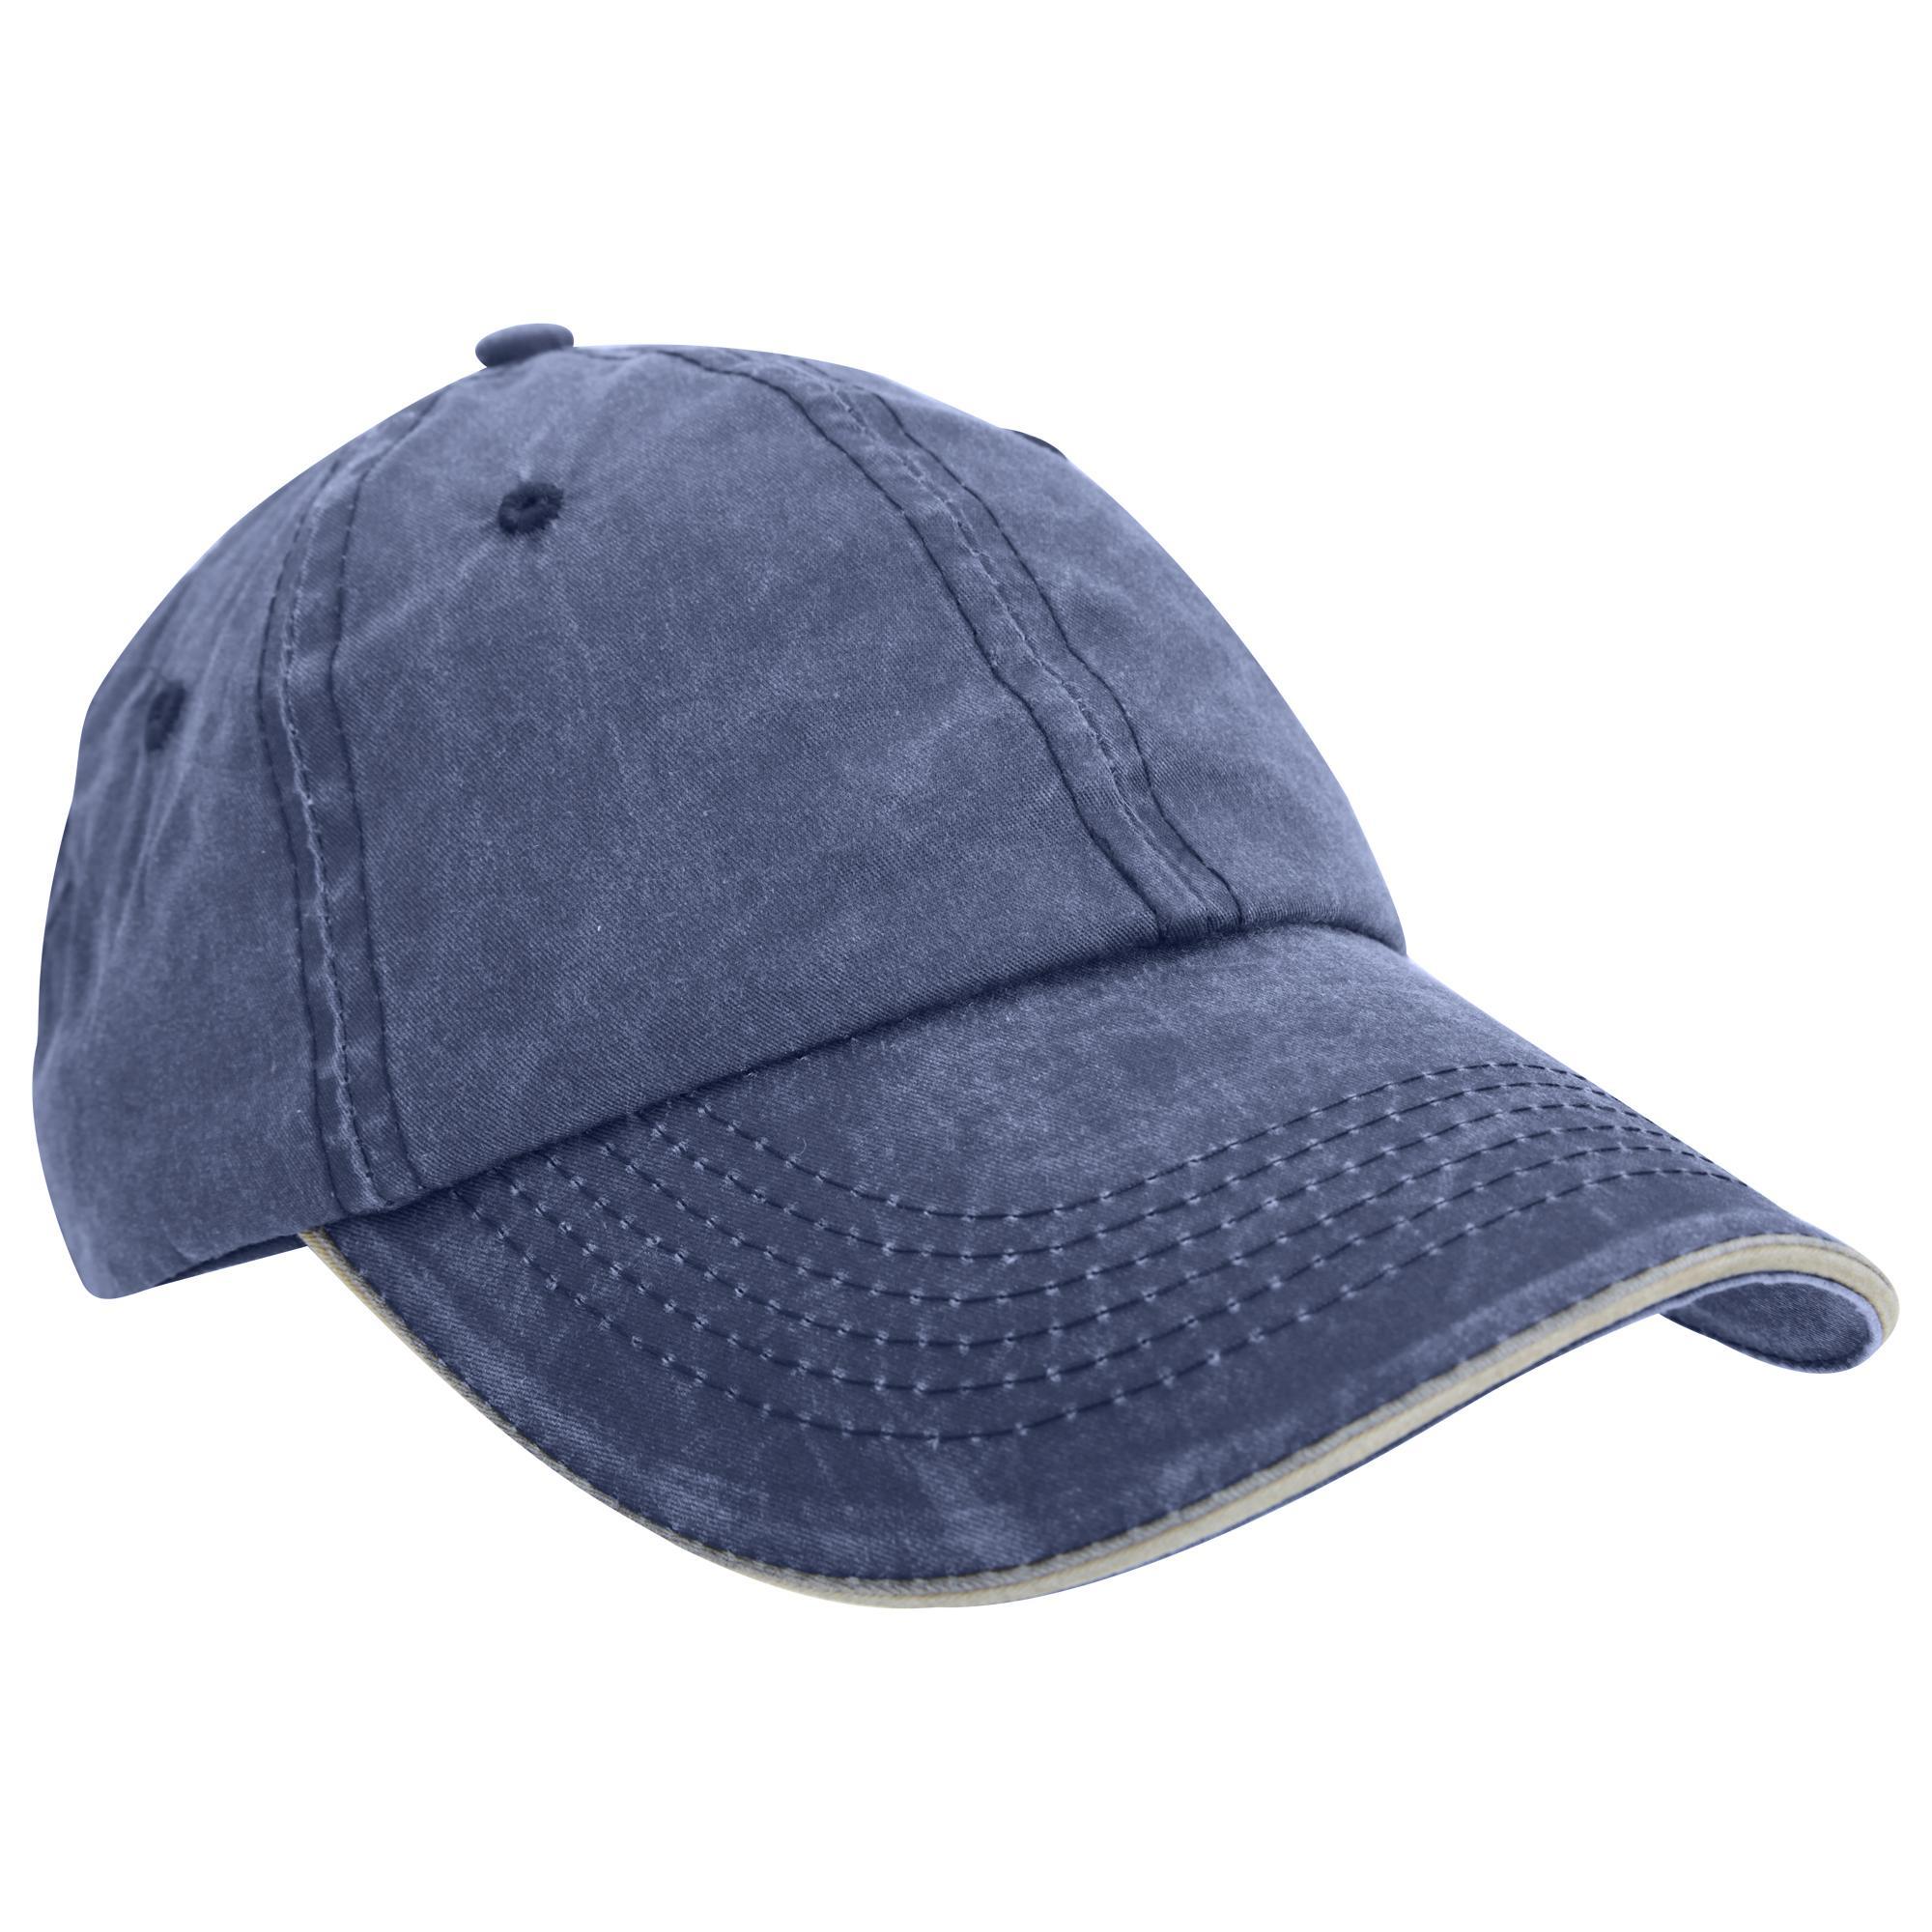 Result Washed Fine Line Cotton Baseball Cap With Sandwich Peak (Navy/Putty) (One Size)